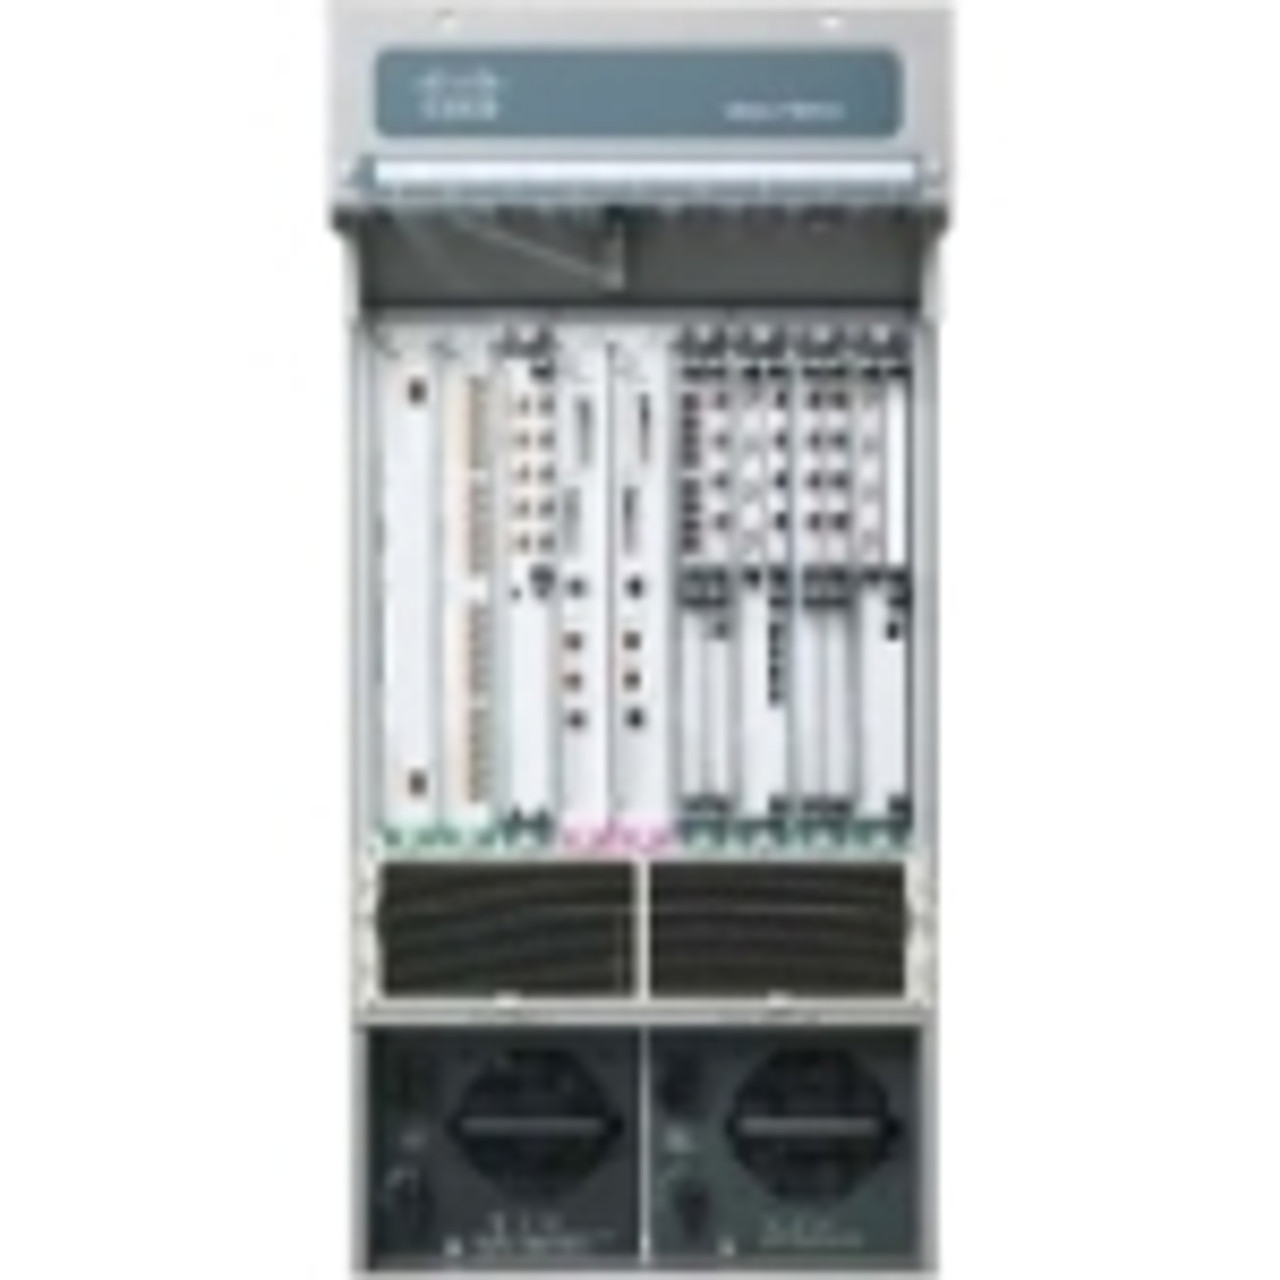 7609S-RSP7C-10G-R Cisco 7609-S Router Chassis 9 Slots 21U Rack-mountable (Refurbished)